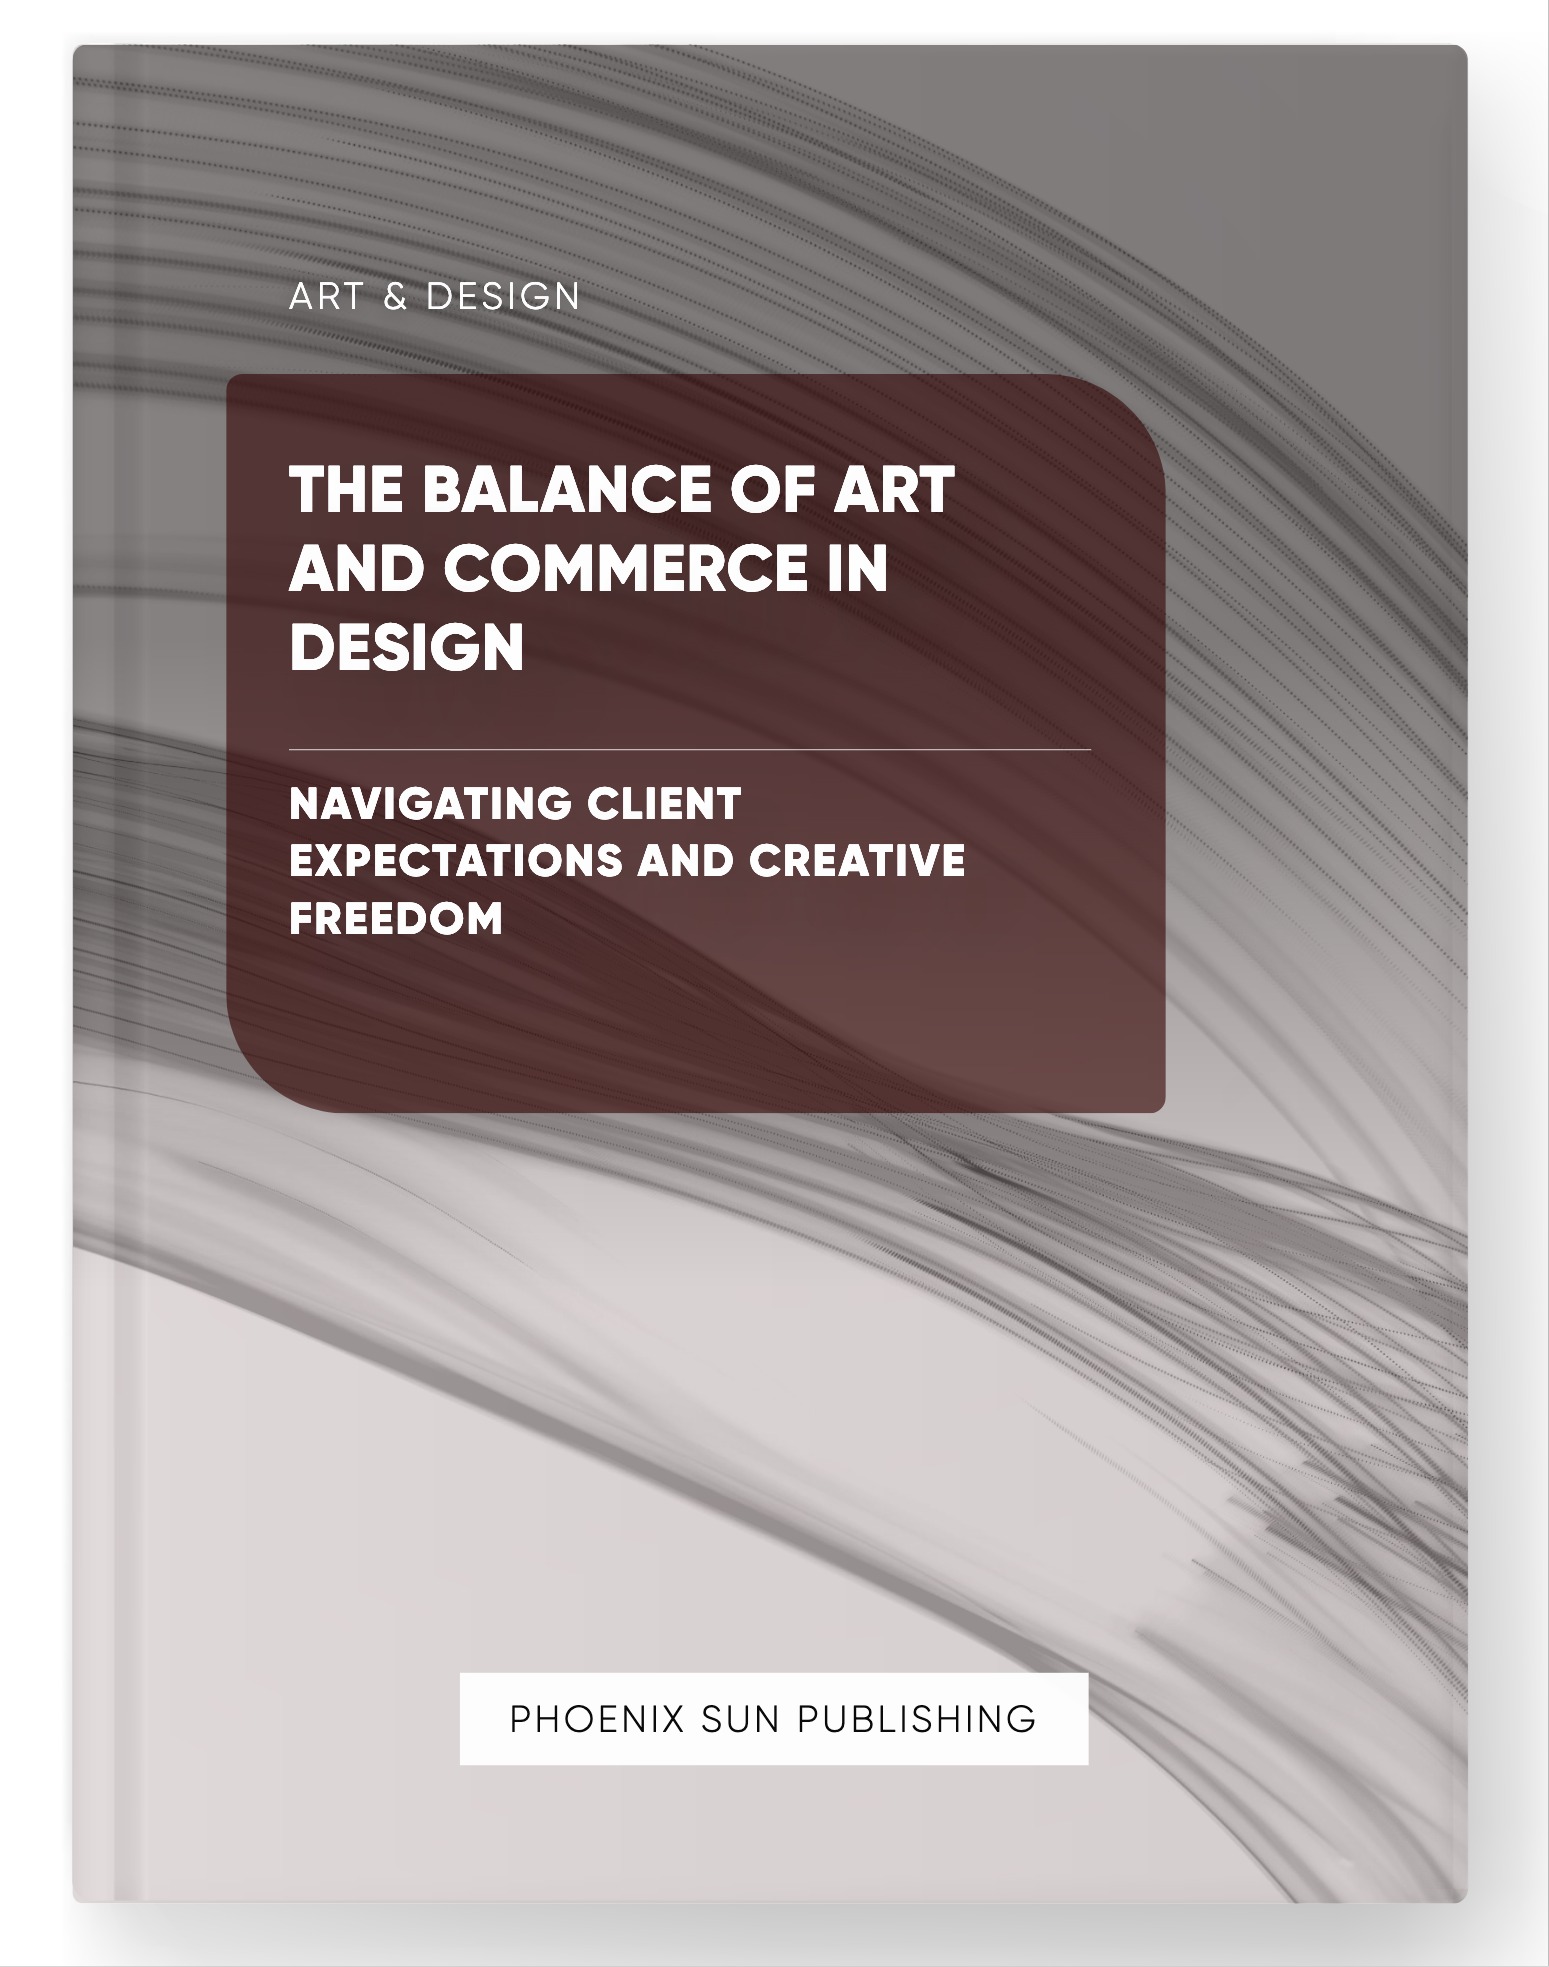 The Balance of Art and Commerce in Design – Navigating Client Expectations and Creative Freedom